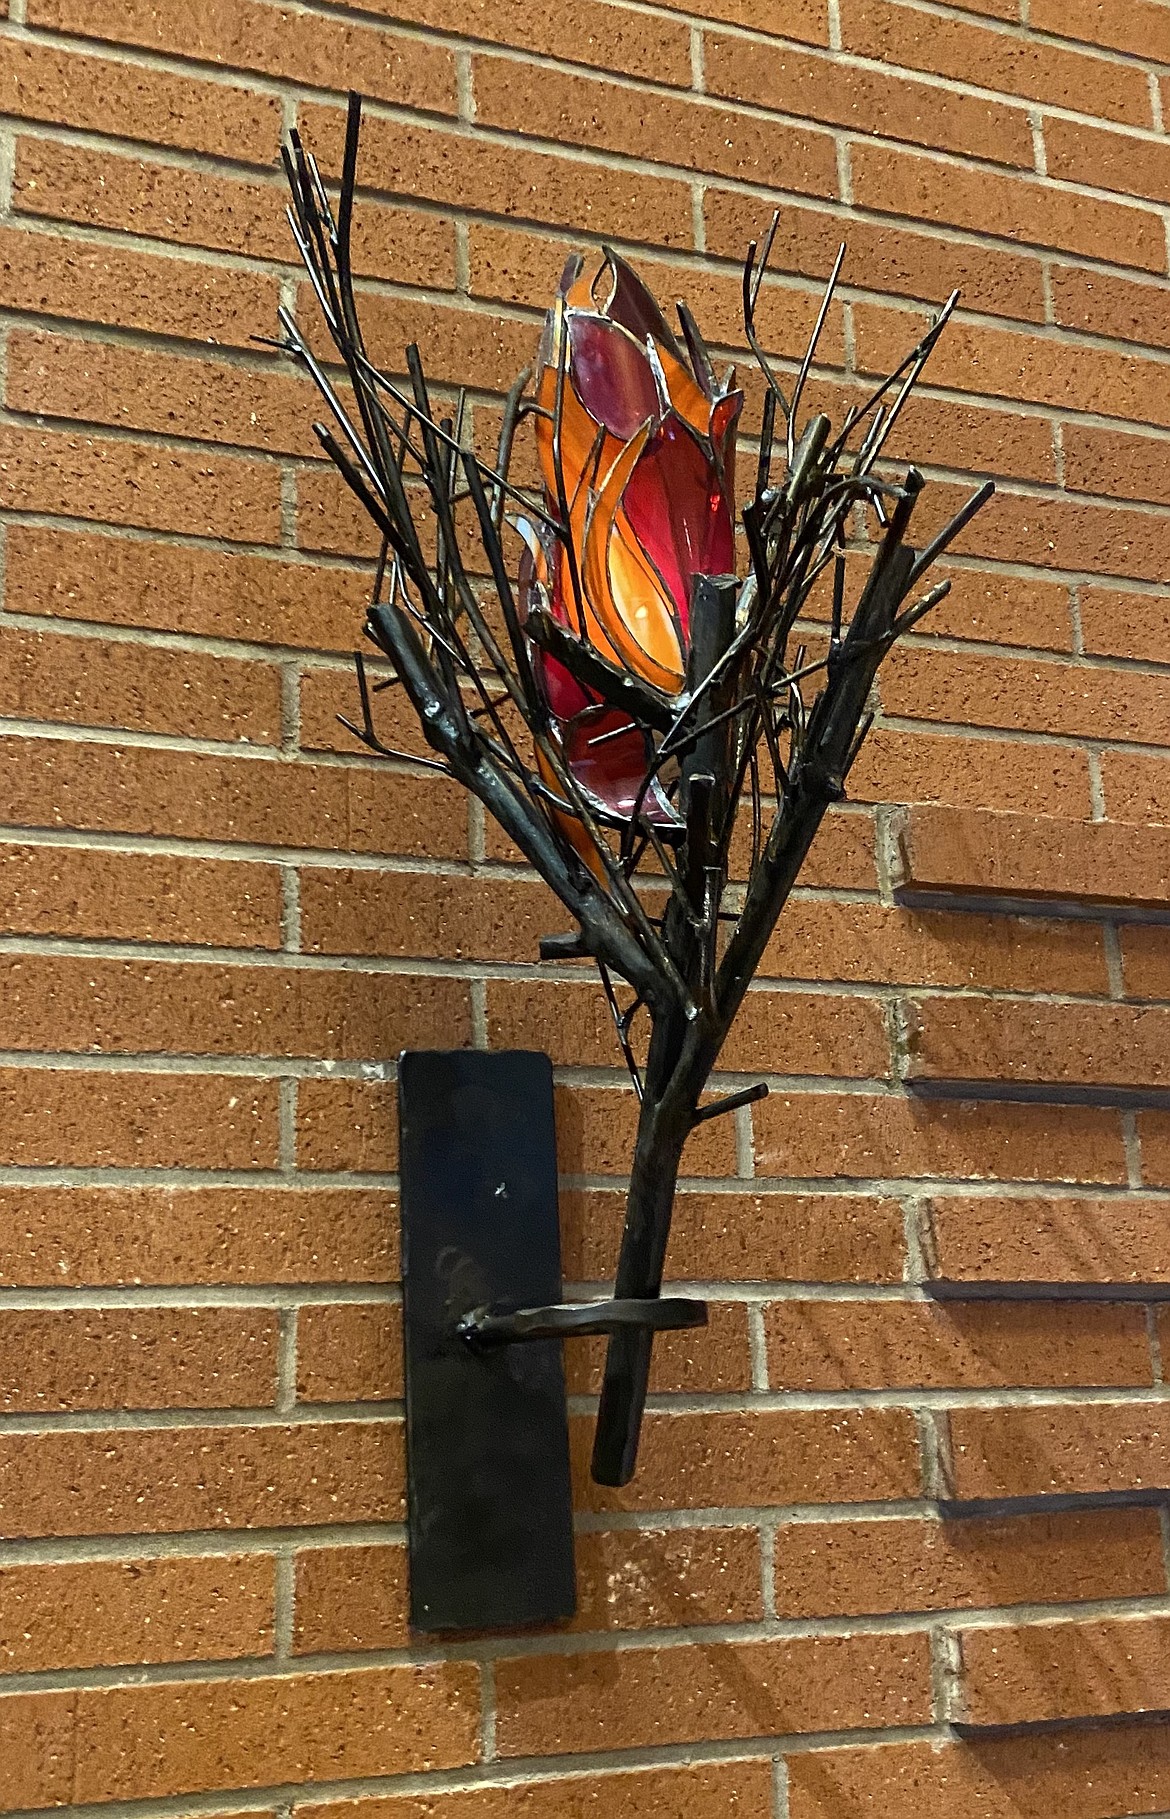 A collaborative art-piece by Tyree Riggs, who did the metal-work, and her sister-in-law Shannon Erwin who crafted the stained glass flames for this lamp that hangs in the sanctuary of Trinity Lutheran Church in Coeur d'Alene.